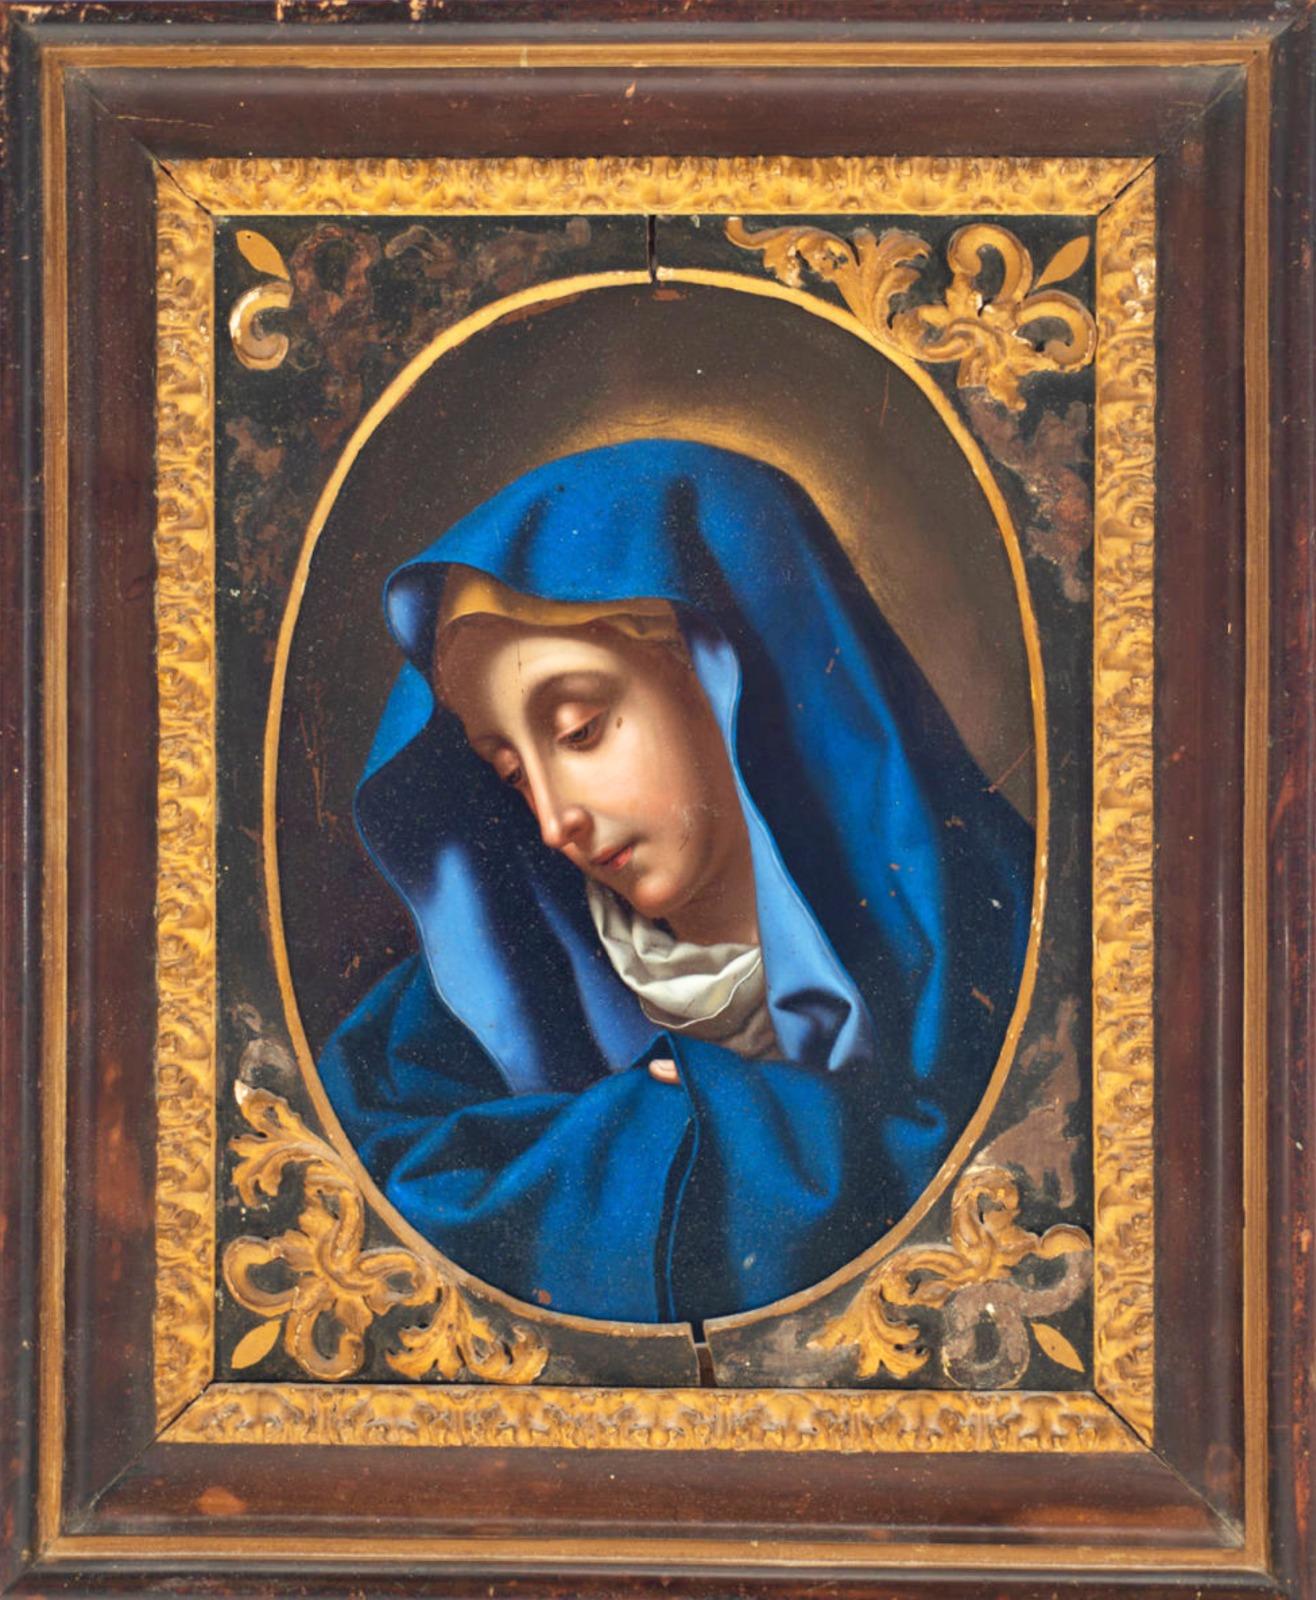 Oval of Mater Dolorosa, Bartolomeo Mancini (Florence 1630 - Rome 1715)
Signed on the back: B. Mancini Firenze 1697.
Measurements: 27 x 20 (copper oval).
Origin: Naples, South Italy
Good condition.